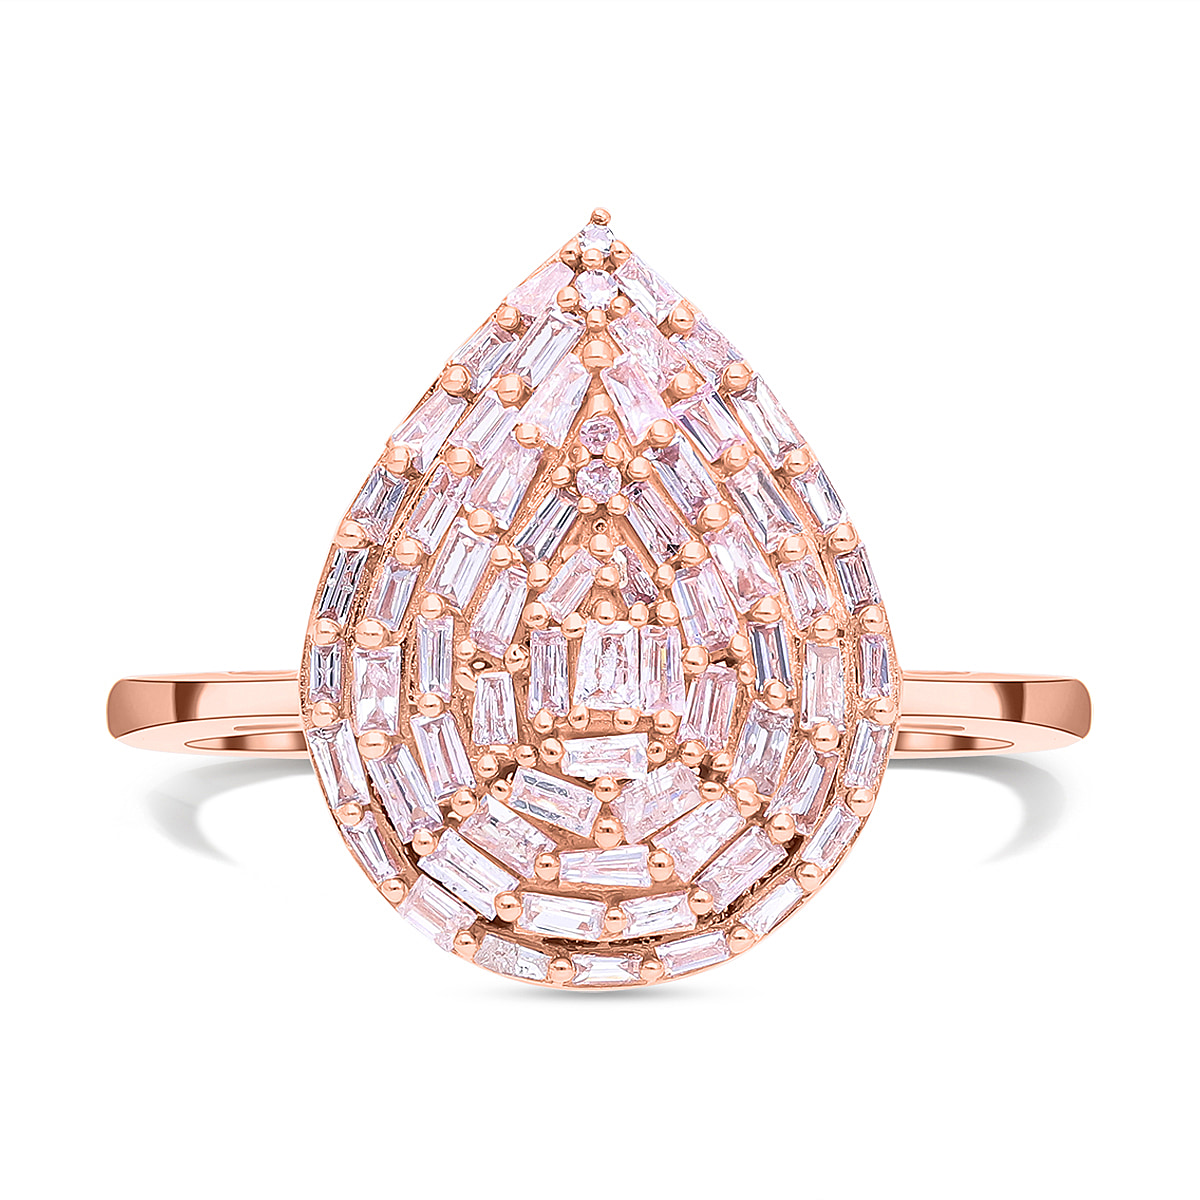 Steves Spectacular Special - 9K Rose Gold Certified Natural Pink Diamond Ring 0.56 Ct